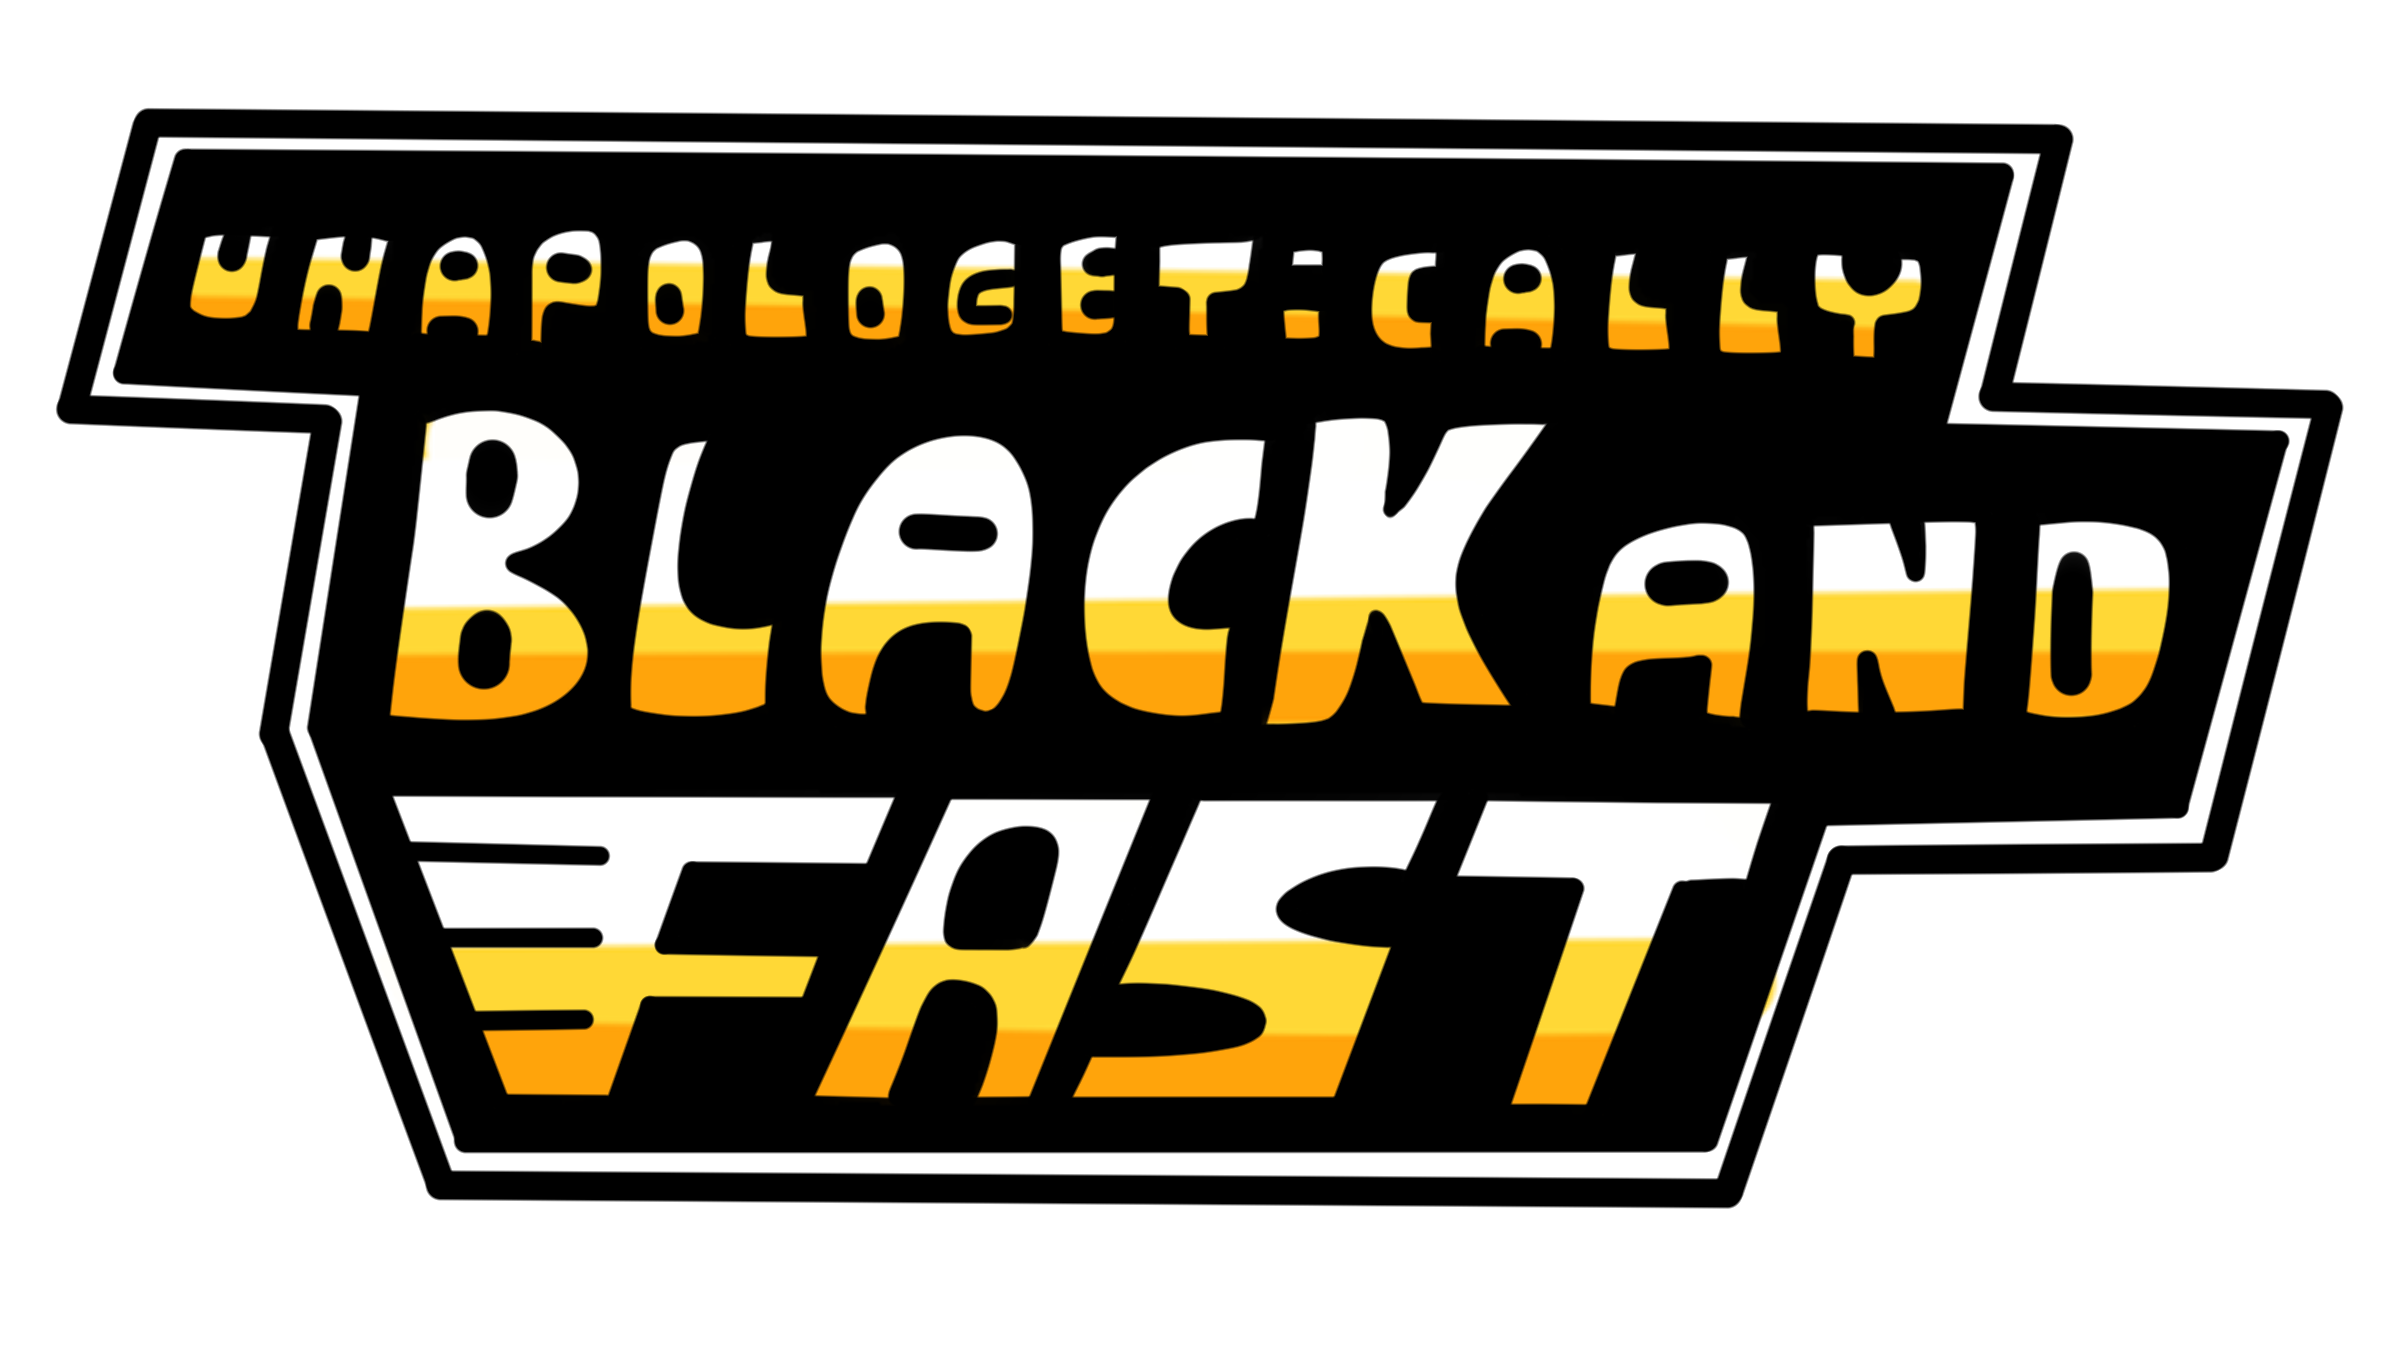 Unapologetically Black And Fast